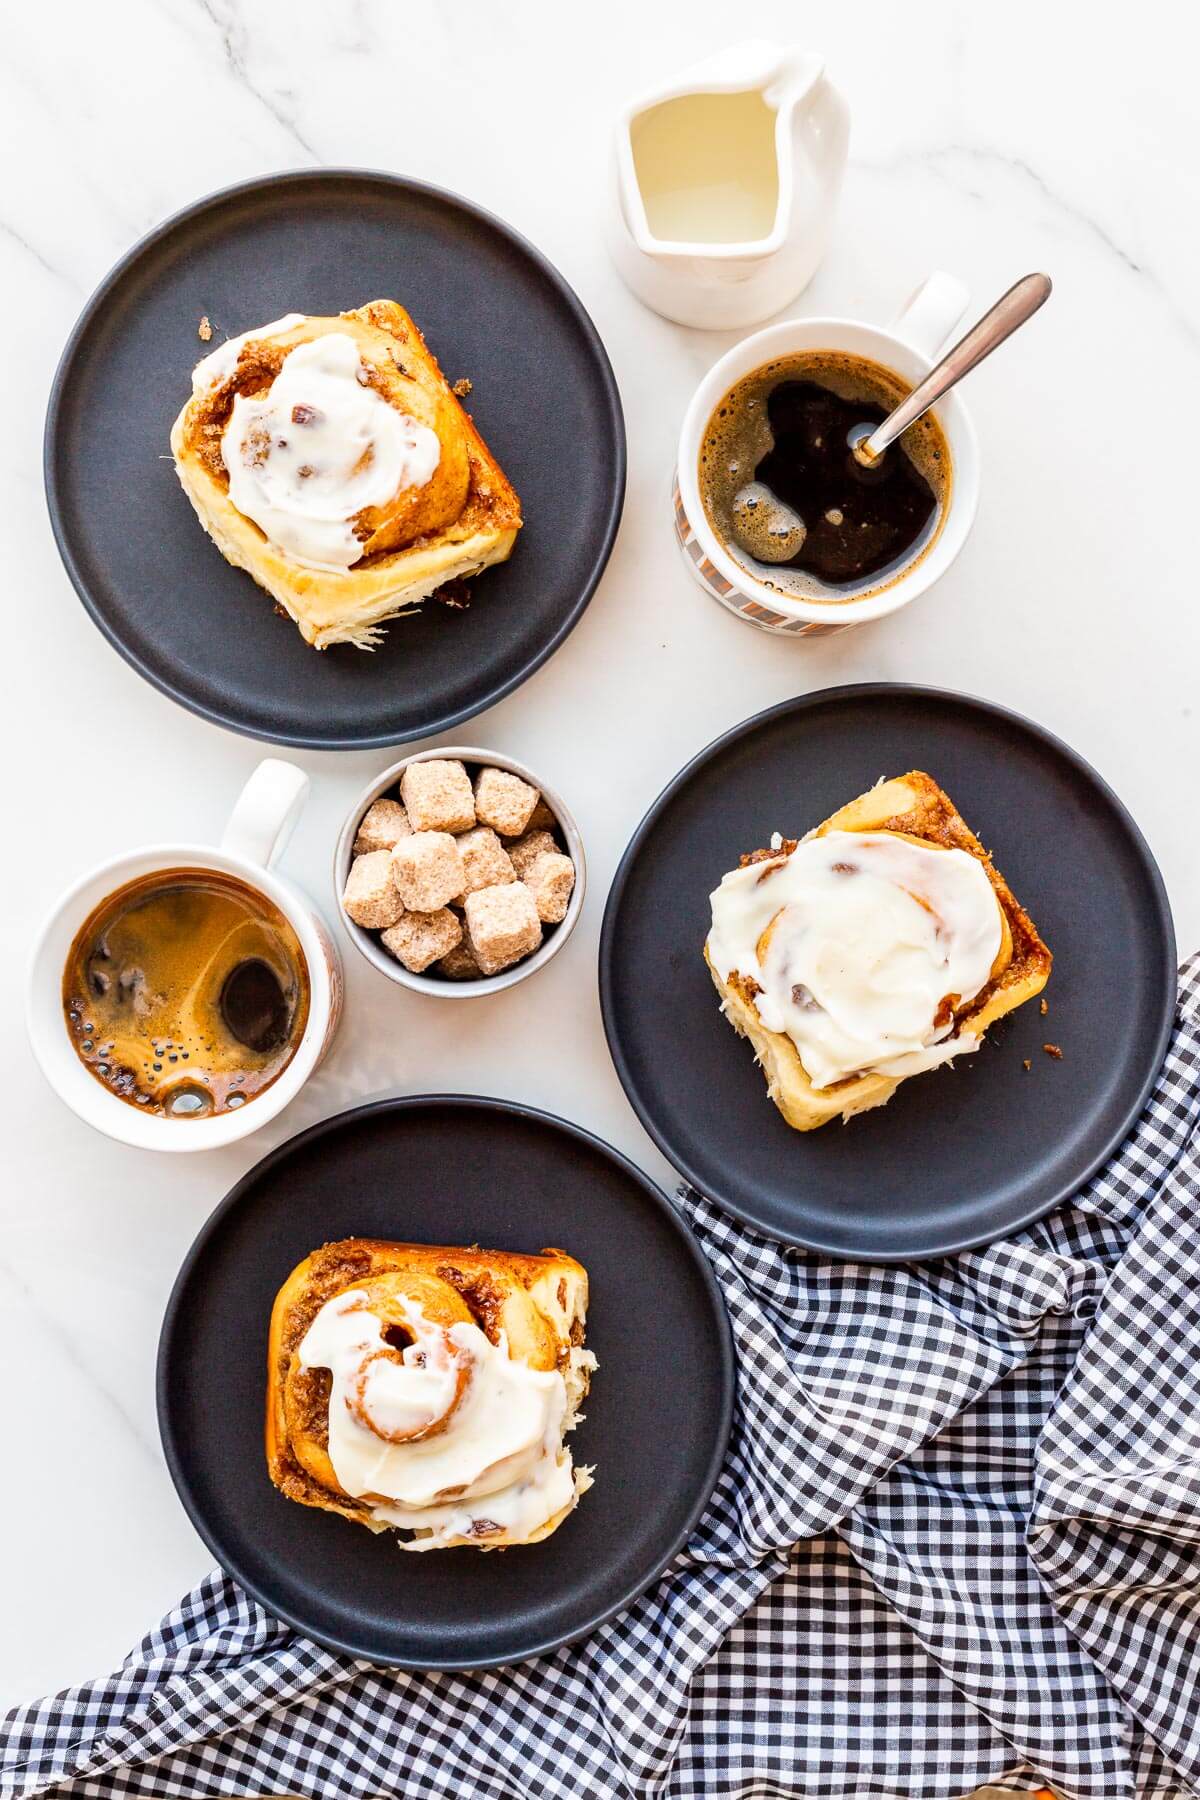 Cinnamon rolls with raisins and cream cheese frosting served on black plates with cups of coffee.